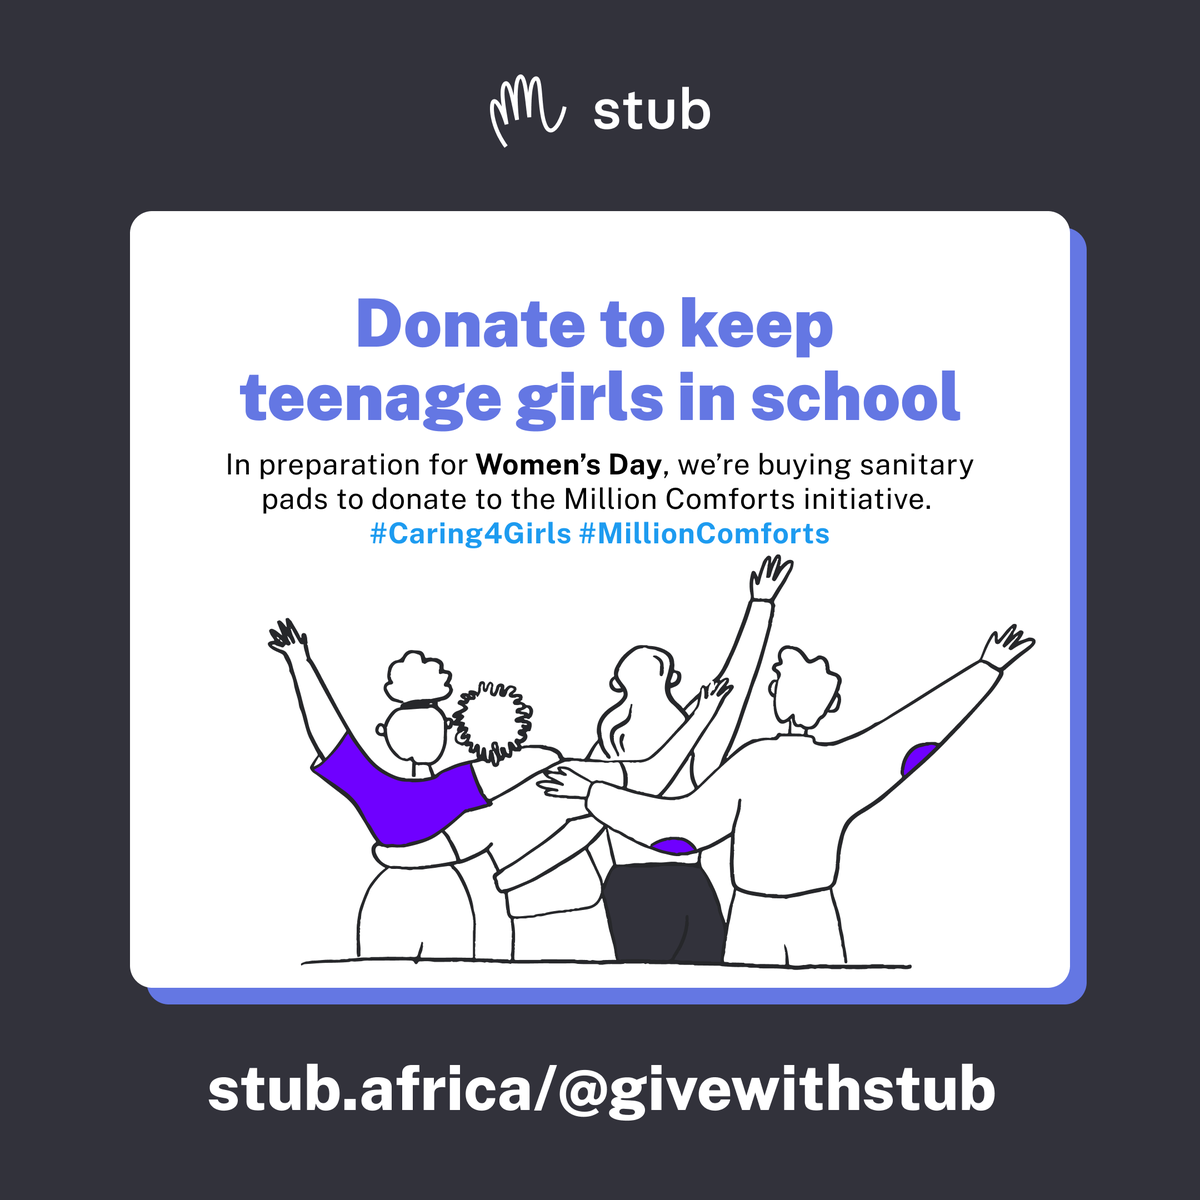 In preparation for Women’s Day, we’re supporting the Million Comforts initiative, which provides sanitary pads to teenage girls in need so that they can continue their education.

stub has already donated over 1000 pads🚀

@Caring4Girls  #MillionComforts #DisChemFoundation